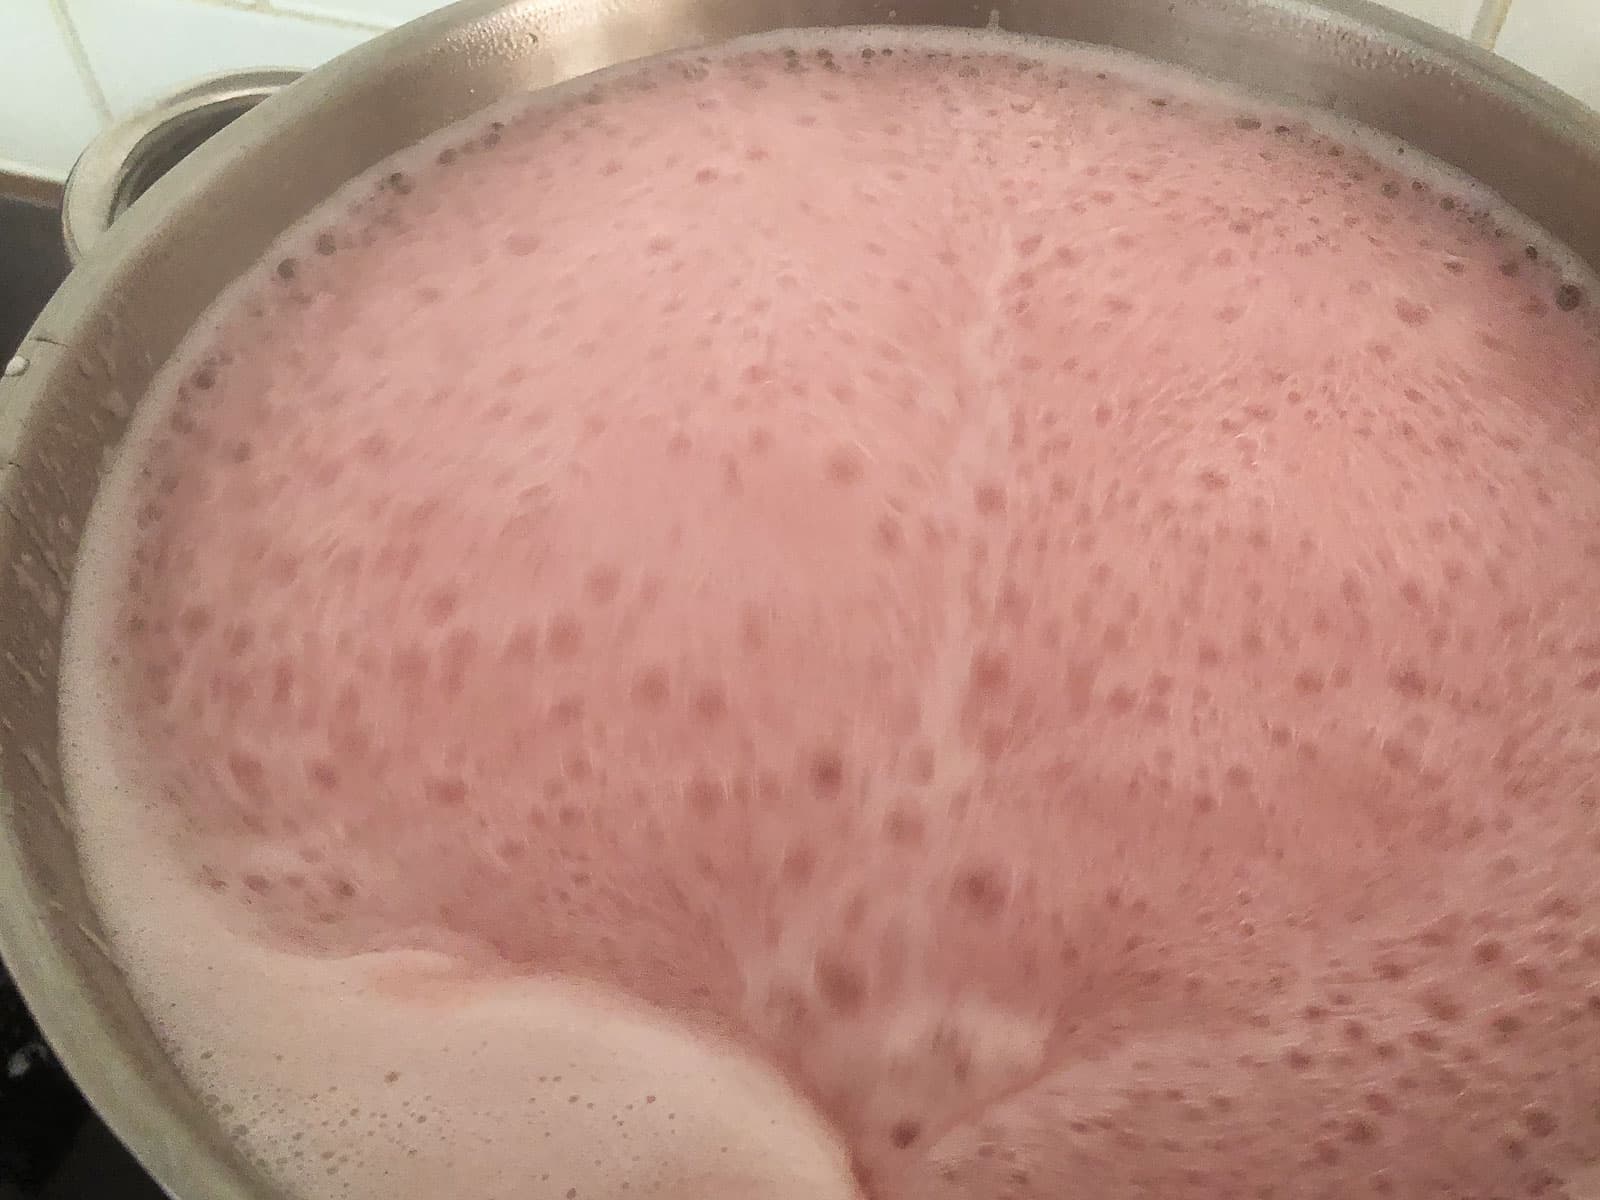 jelly process showing the rapid boil needed for the set